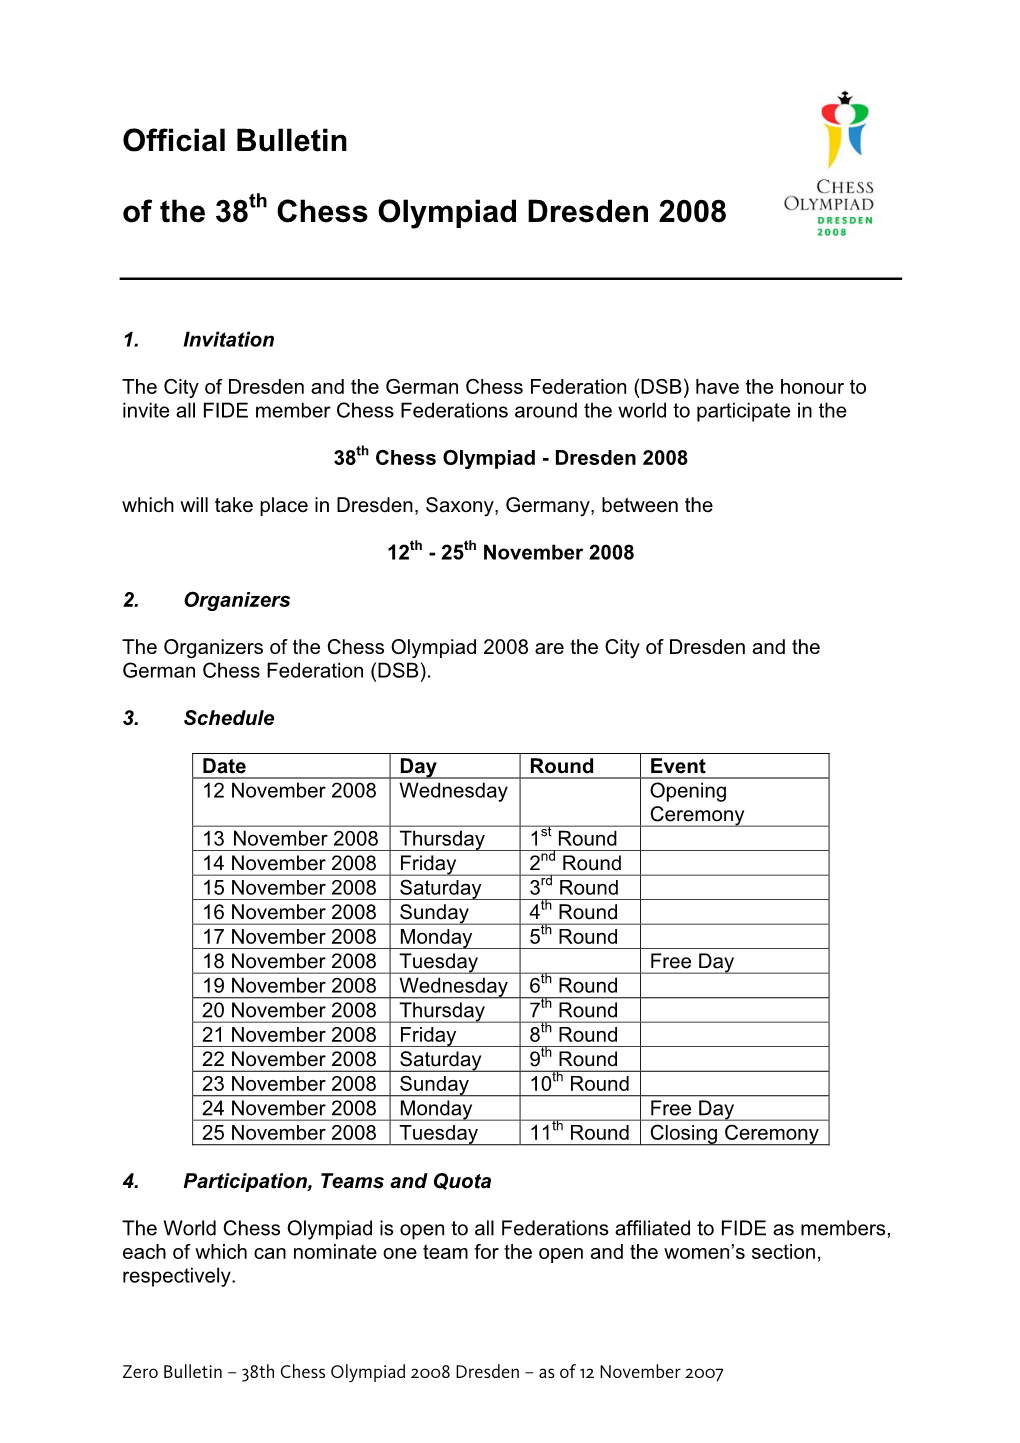 Official Bulletin of the 38 Chess Olympiad Dresden 2008